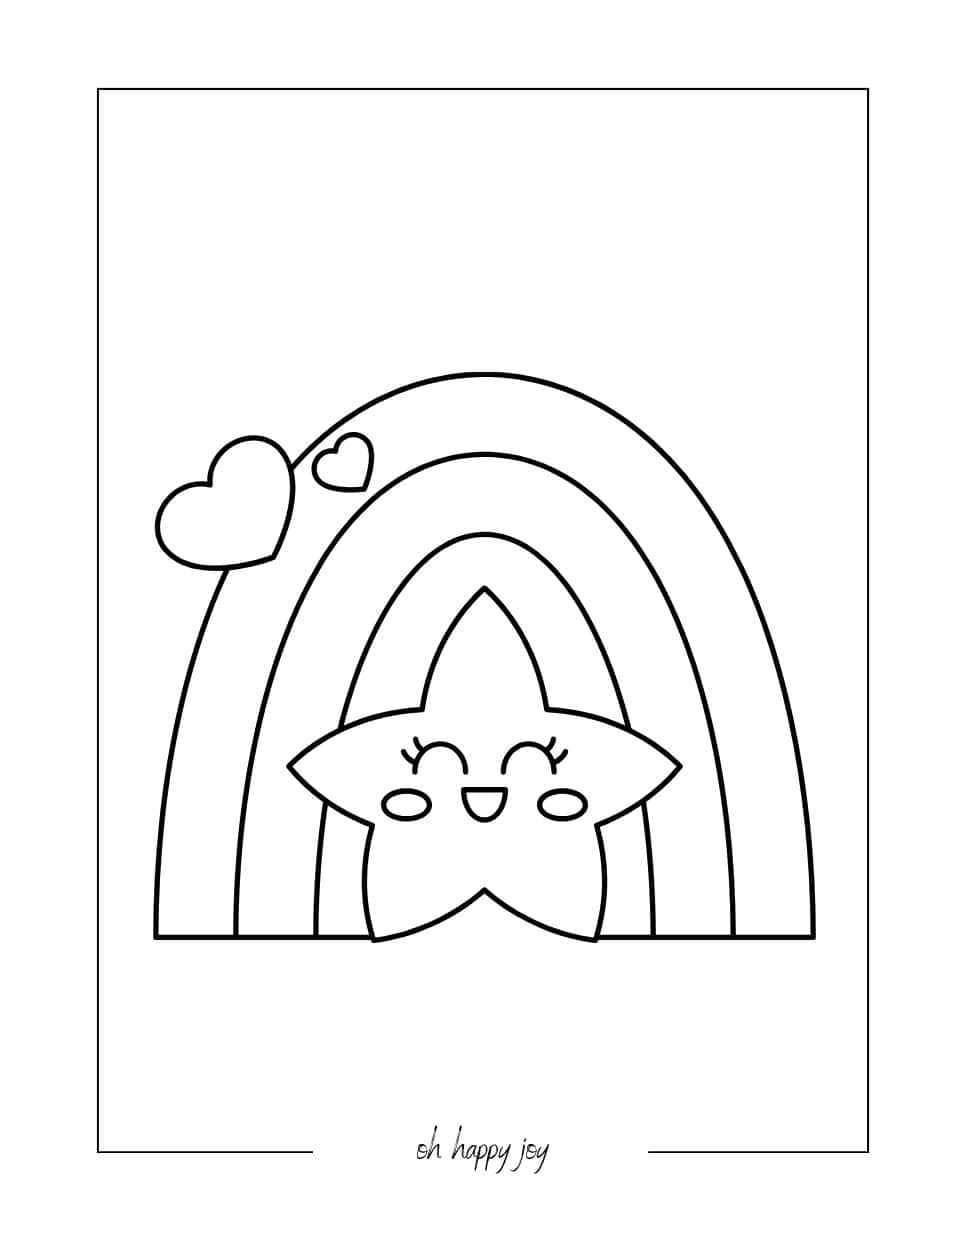 cute rainbow and stars coloring page